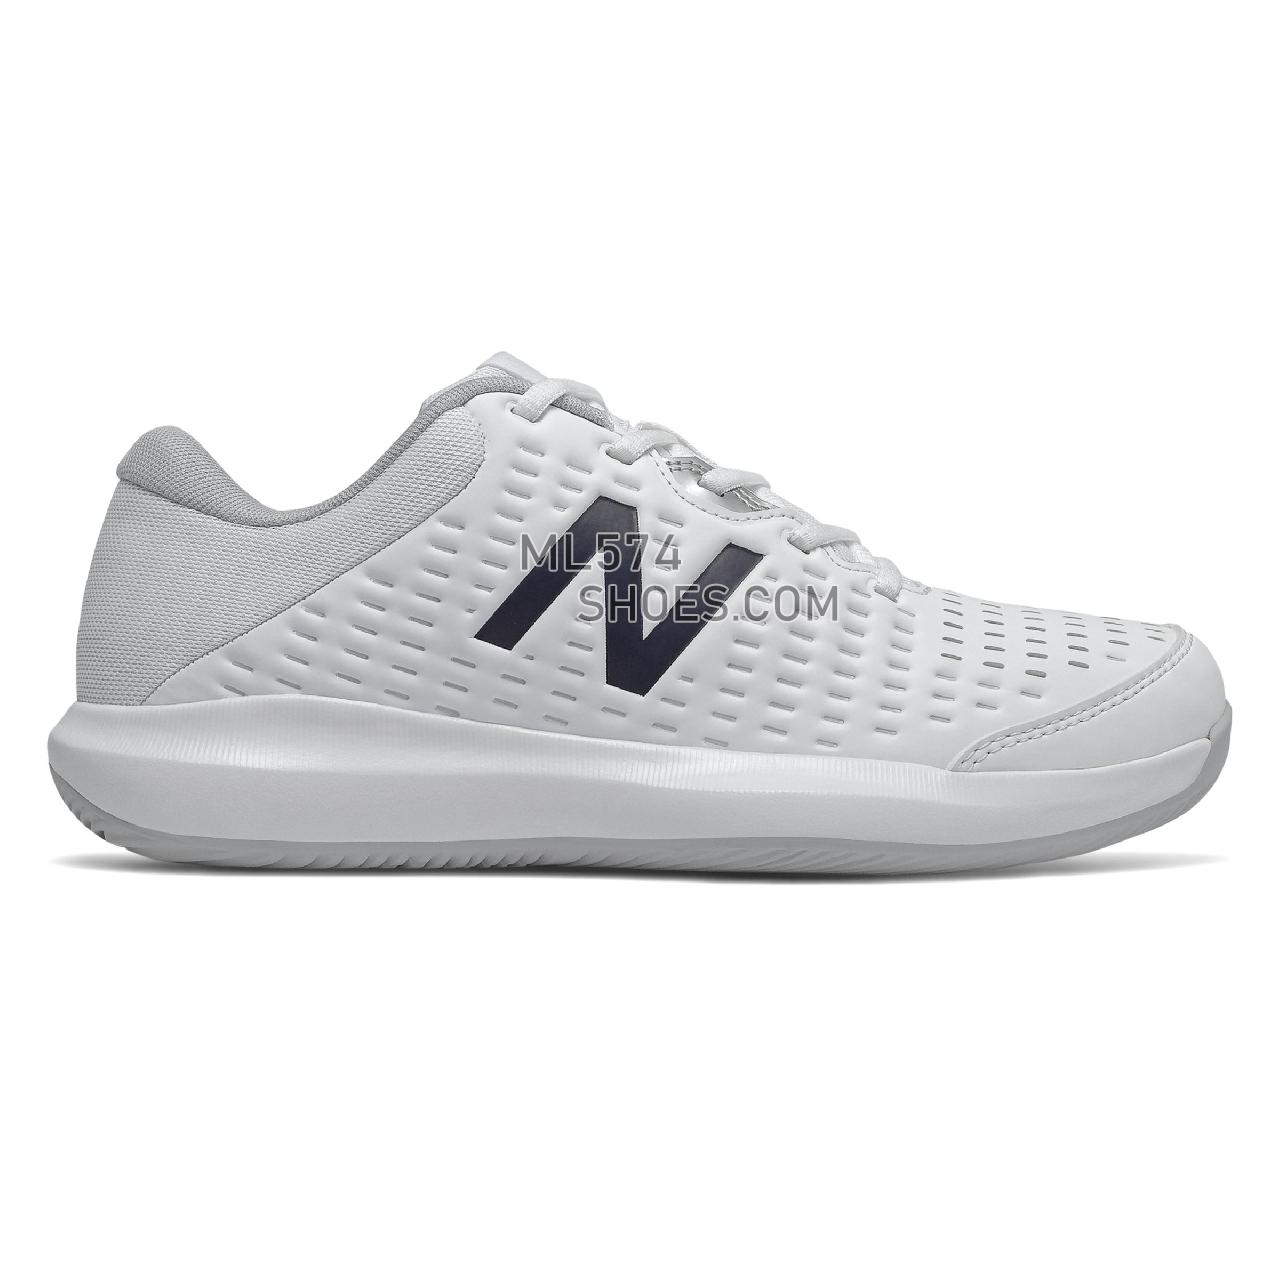 New Balance 696v4 - Women's Tennis - White with Pigment - WCH696W4